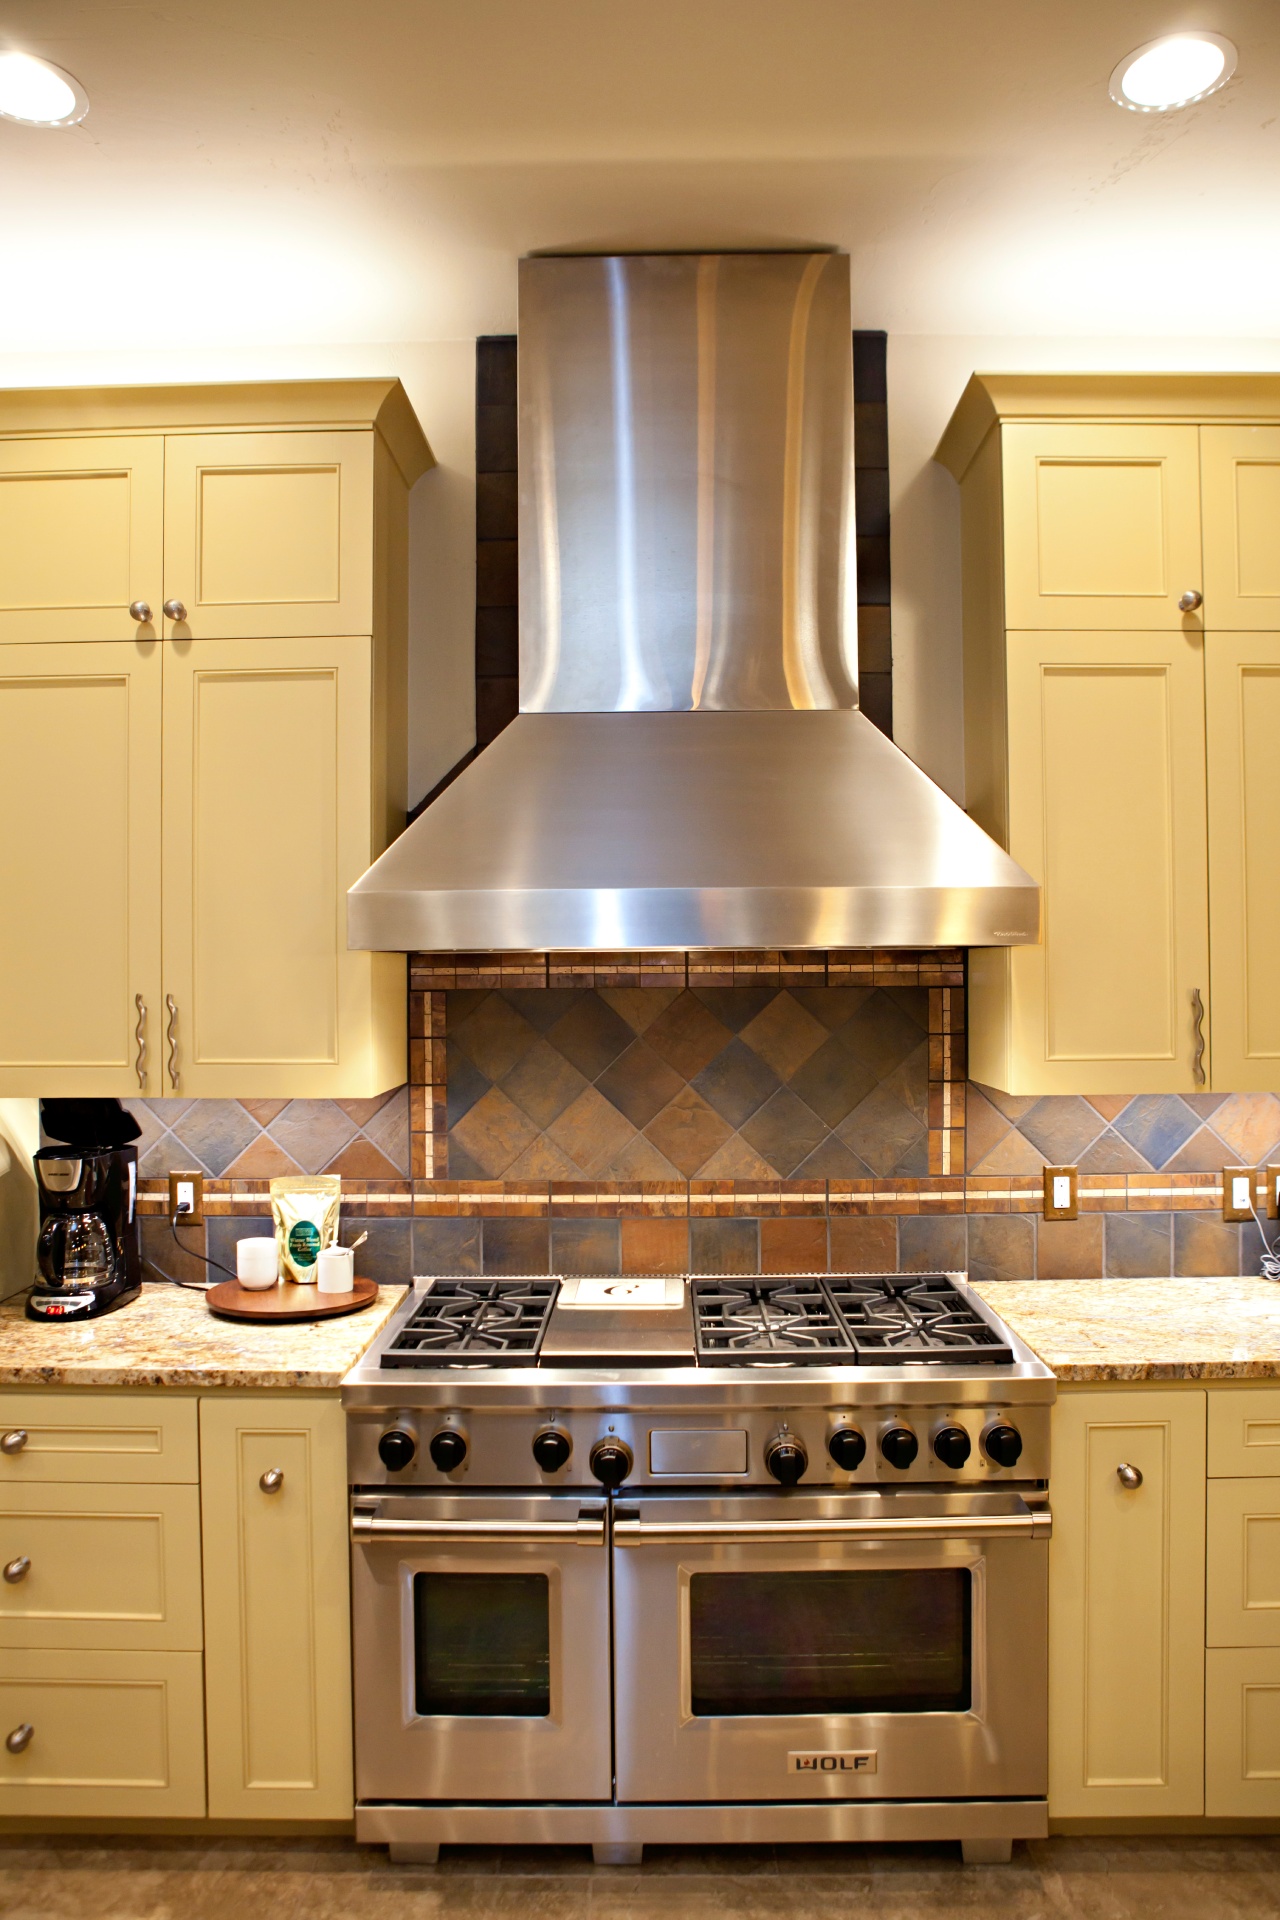 kitchen cabinets with beige paint and a huge stove with range hood